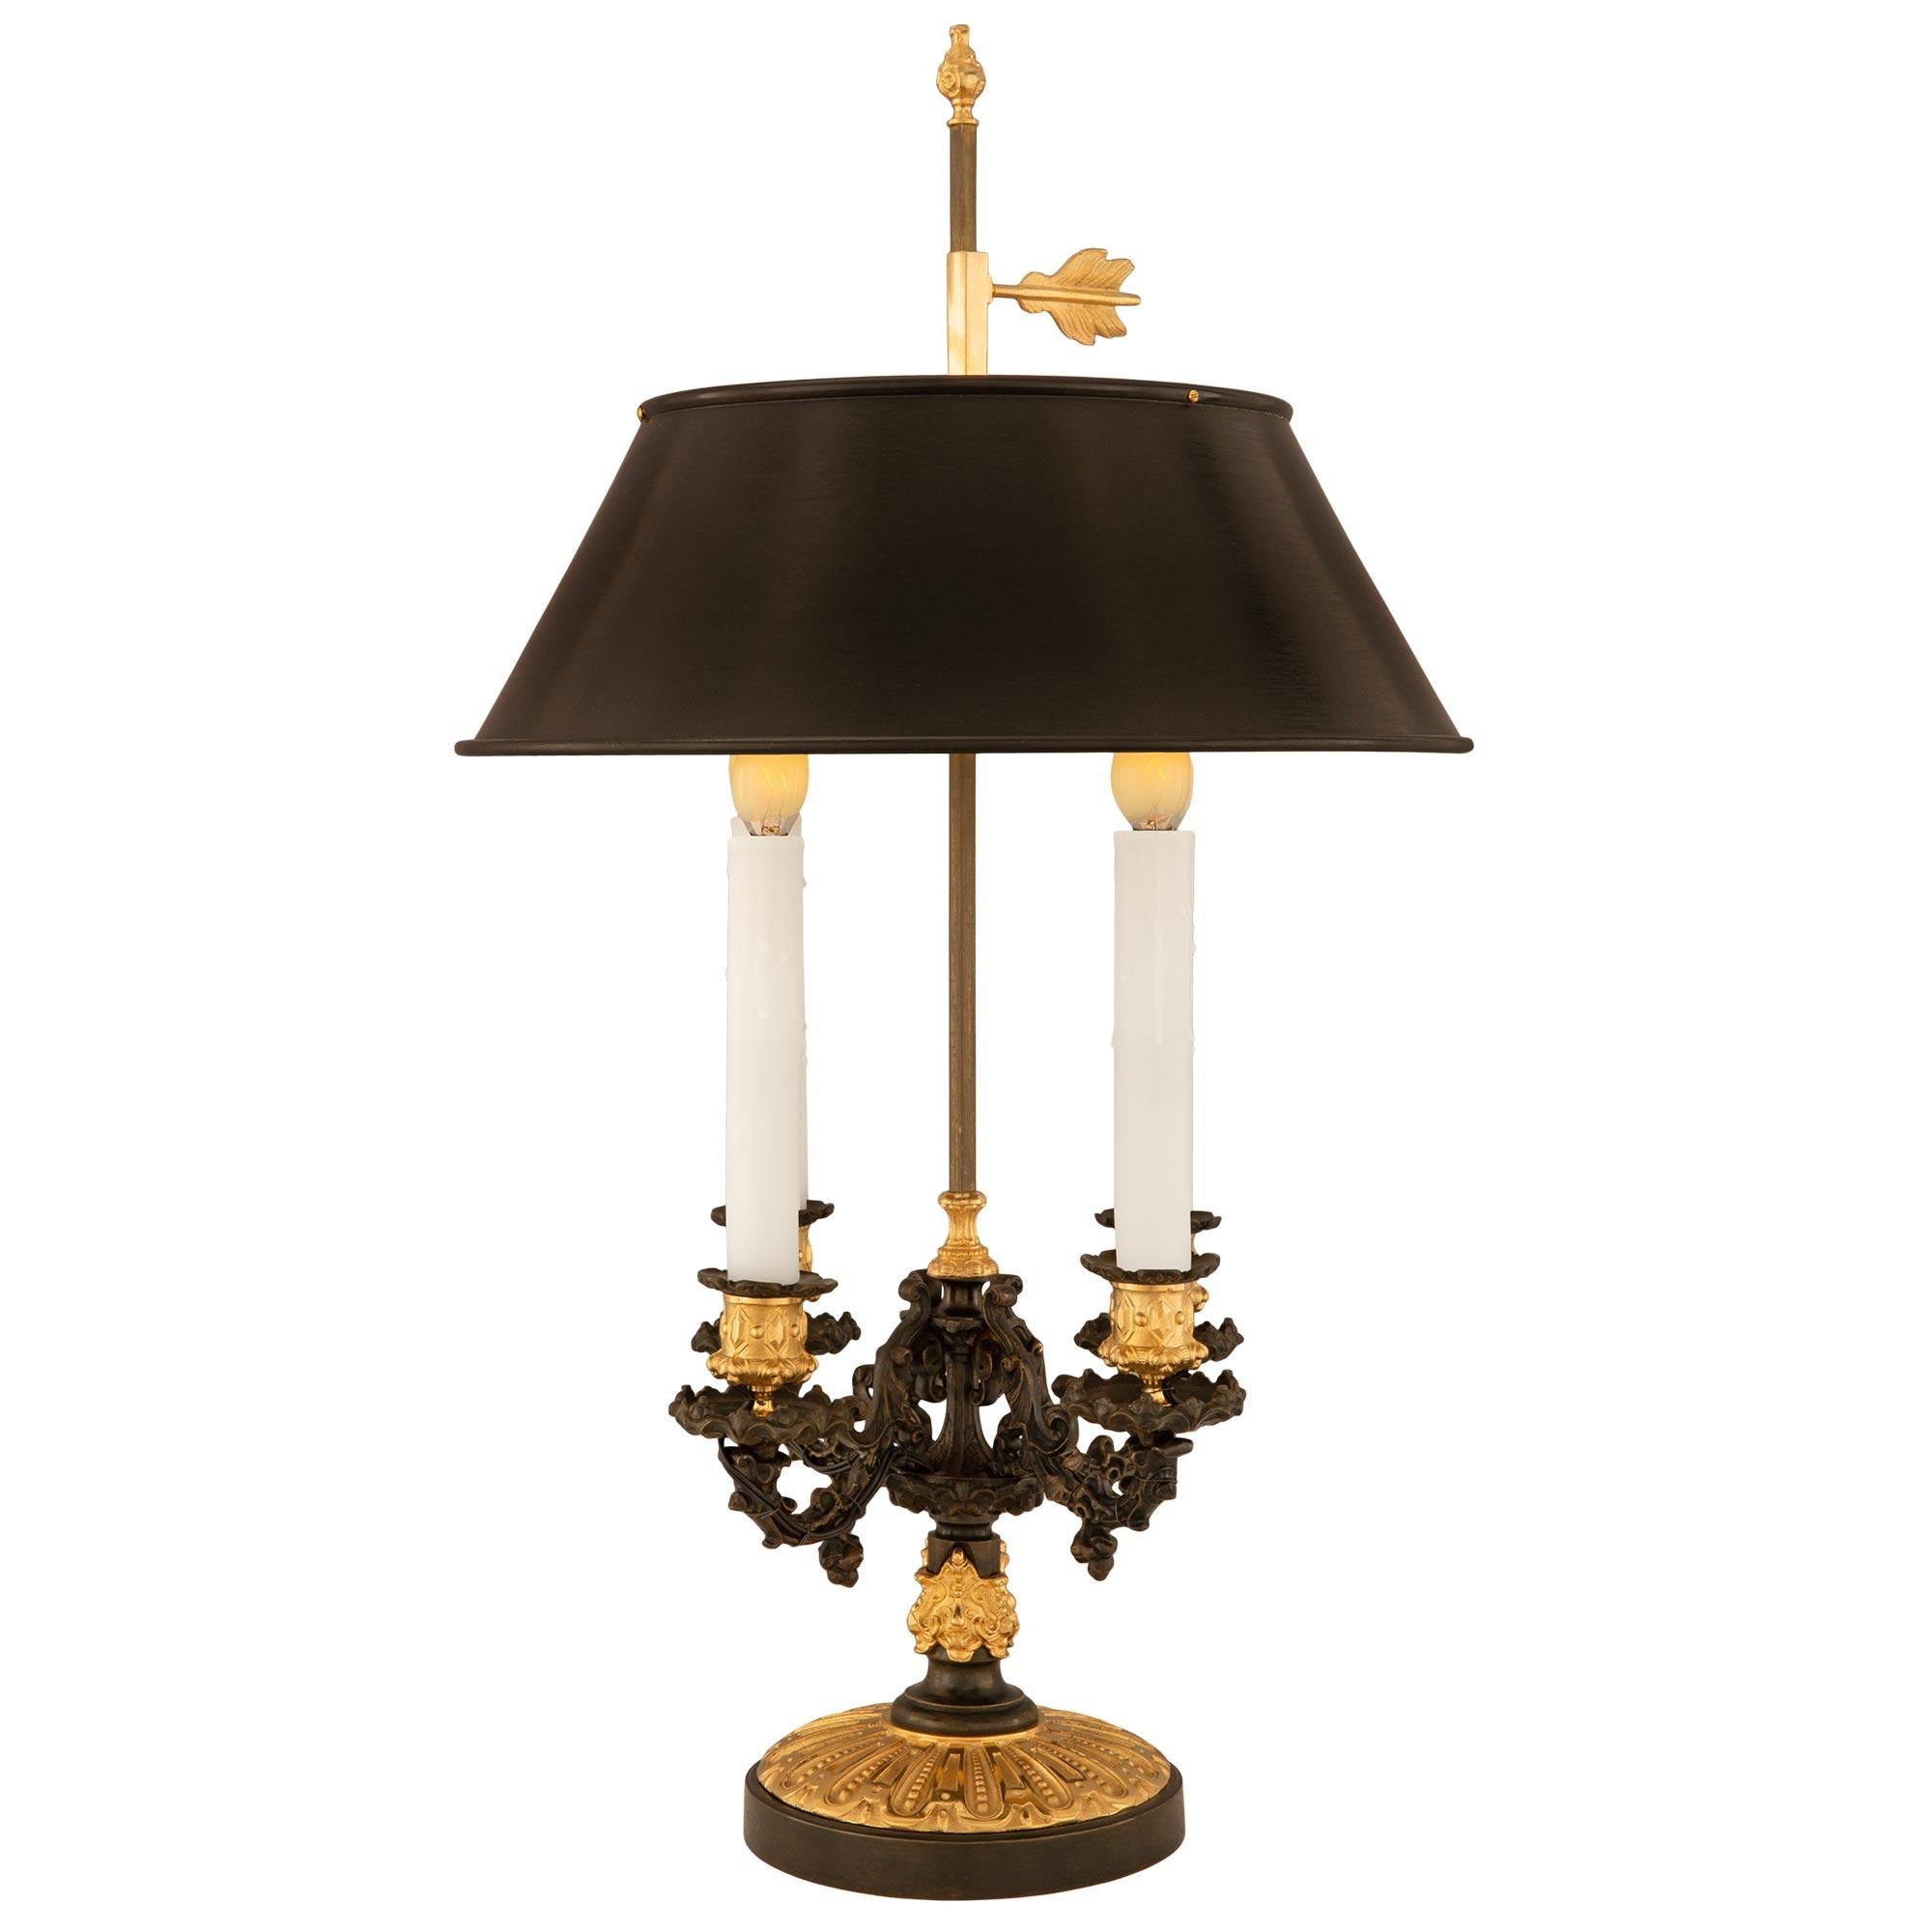 A striking French 19th century Louis Philippe period patinated bronze and ormolu bouillotte lamp. The four arm lamp is raised by an elegant circular patinated bronze base with beautiful foliate fluted designs in a superb satin and burnished finish.